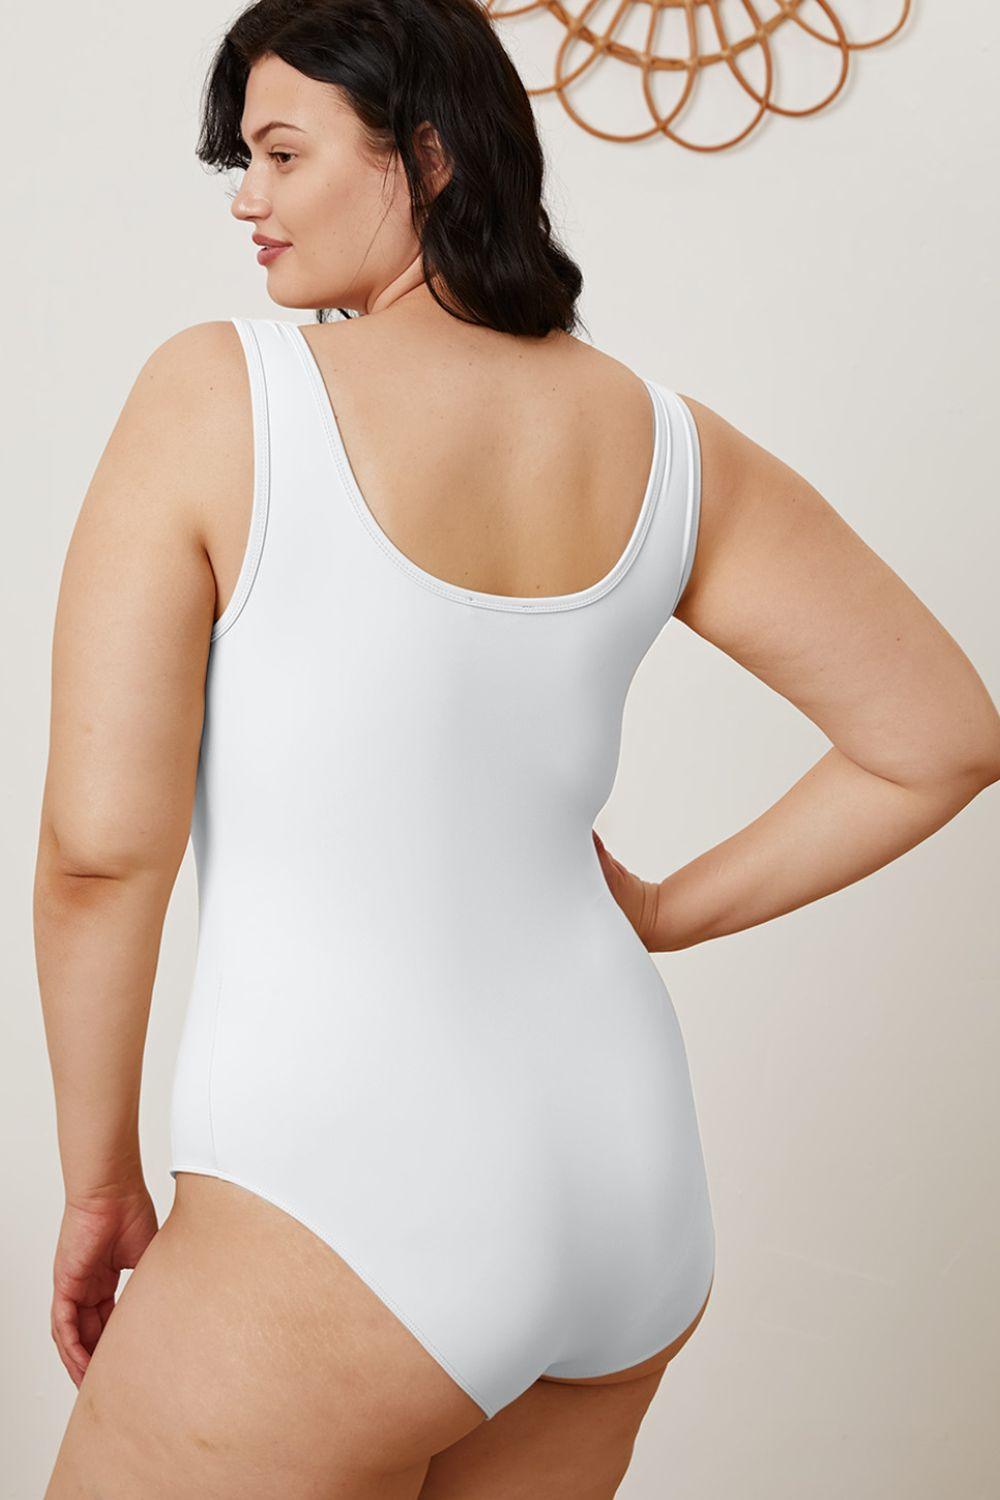 a woman in a white bodysuit with her hands on her hips